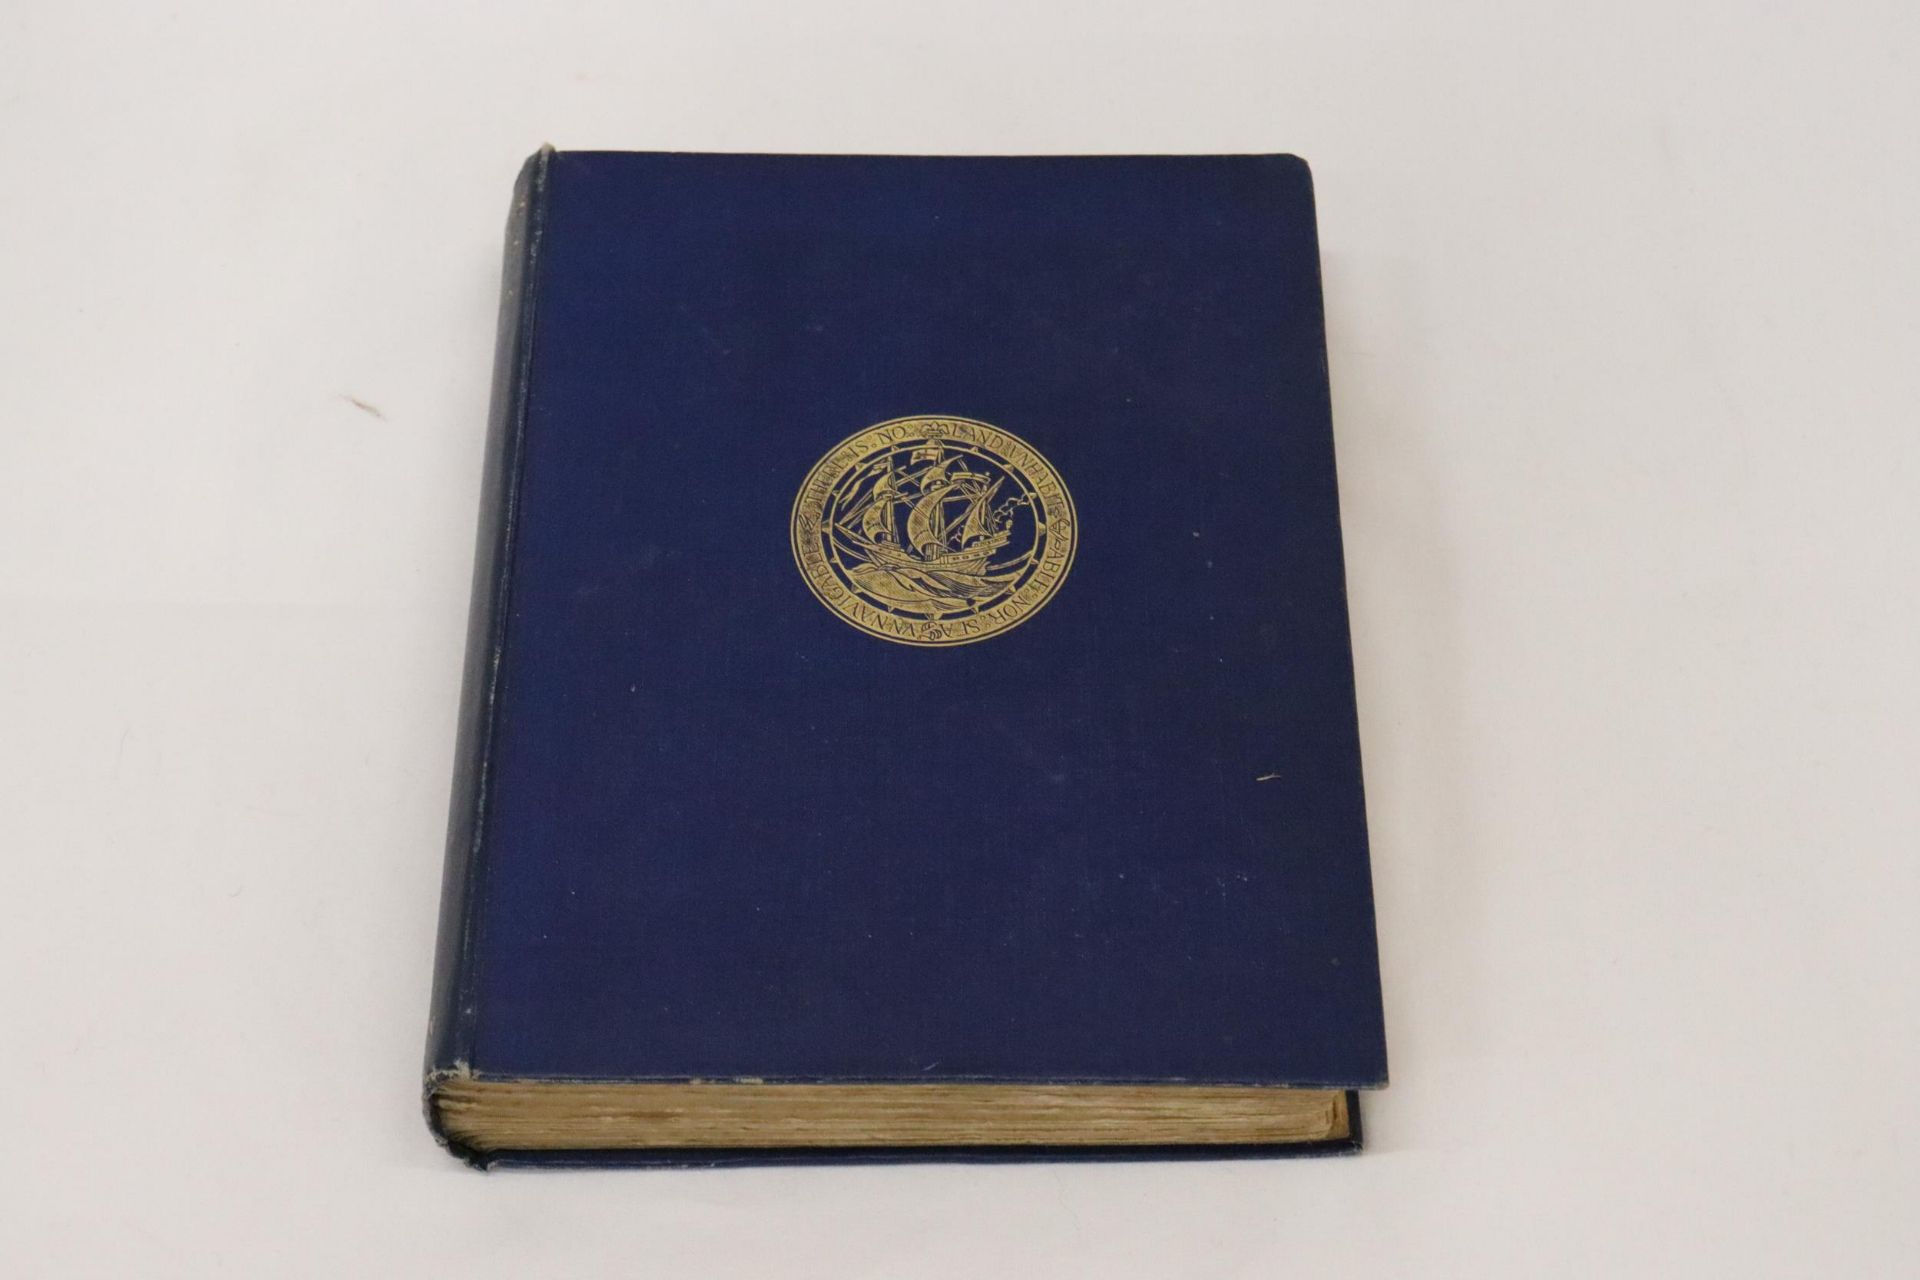 A 1926 EDITION OF HAKLVYT'S VOYAGES